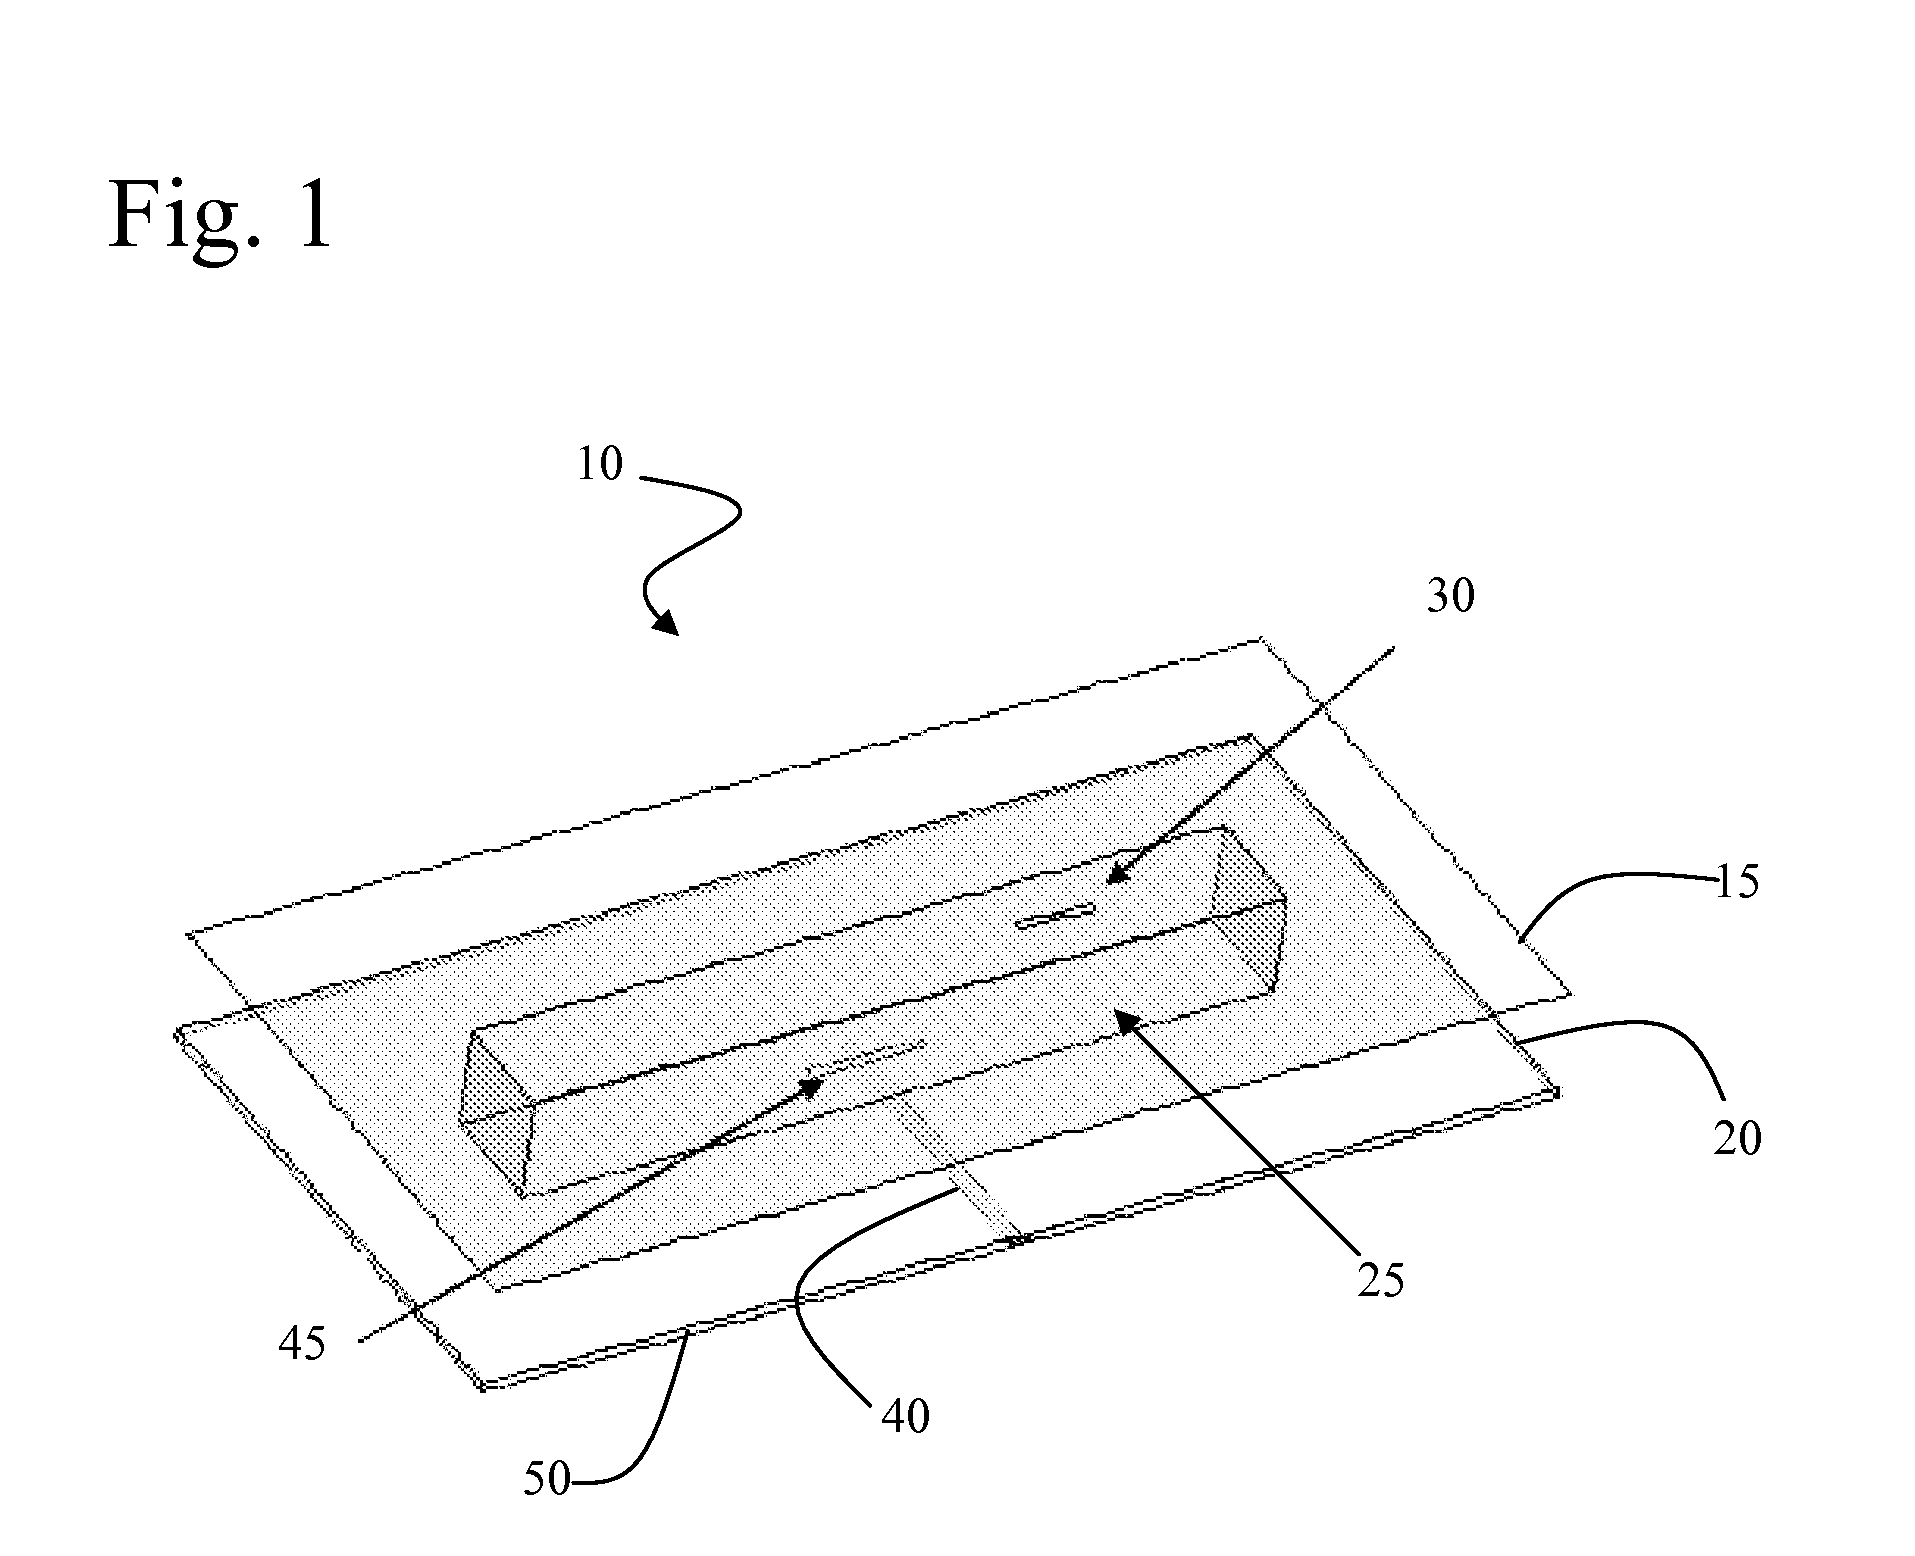 High-Frequency Feed Structure Antenna Apparatus and Method of Use